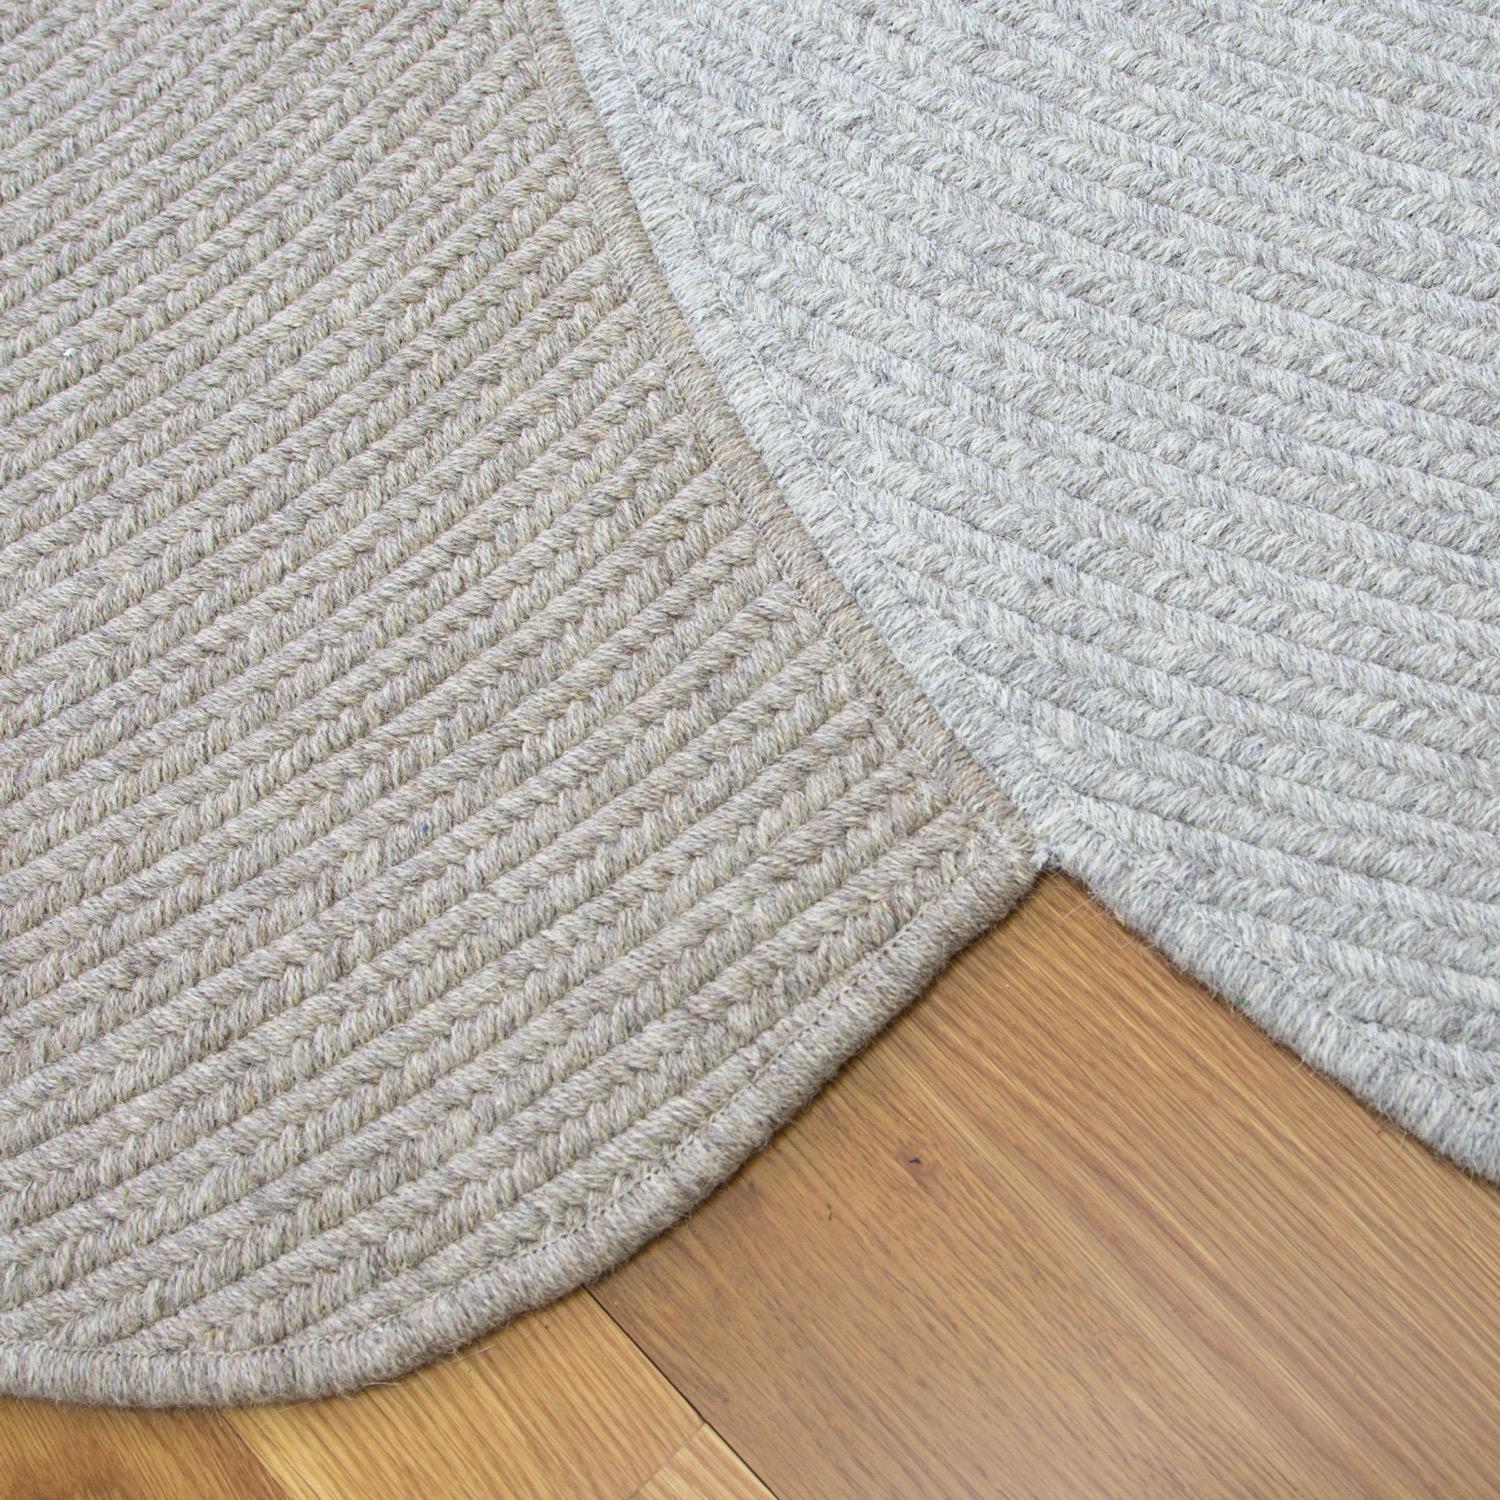 Riff Rug from Souda, 4x6 ft, Natural Wool, Dark Grey In New Condition For Sale In Brooklyn, NY